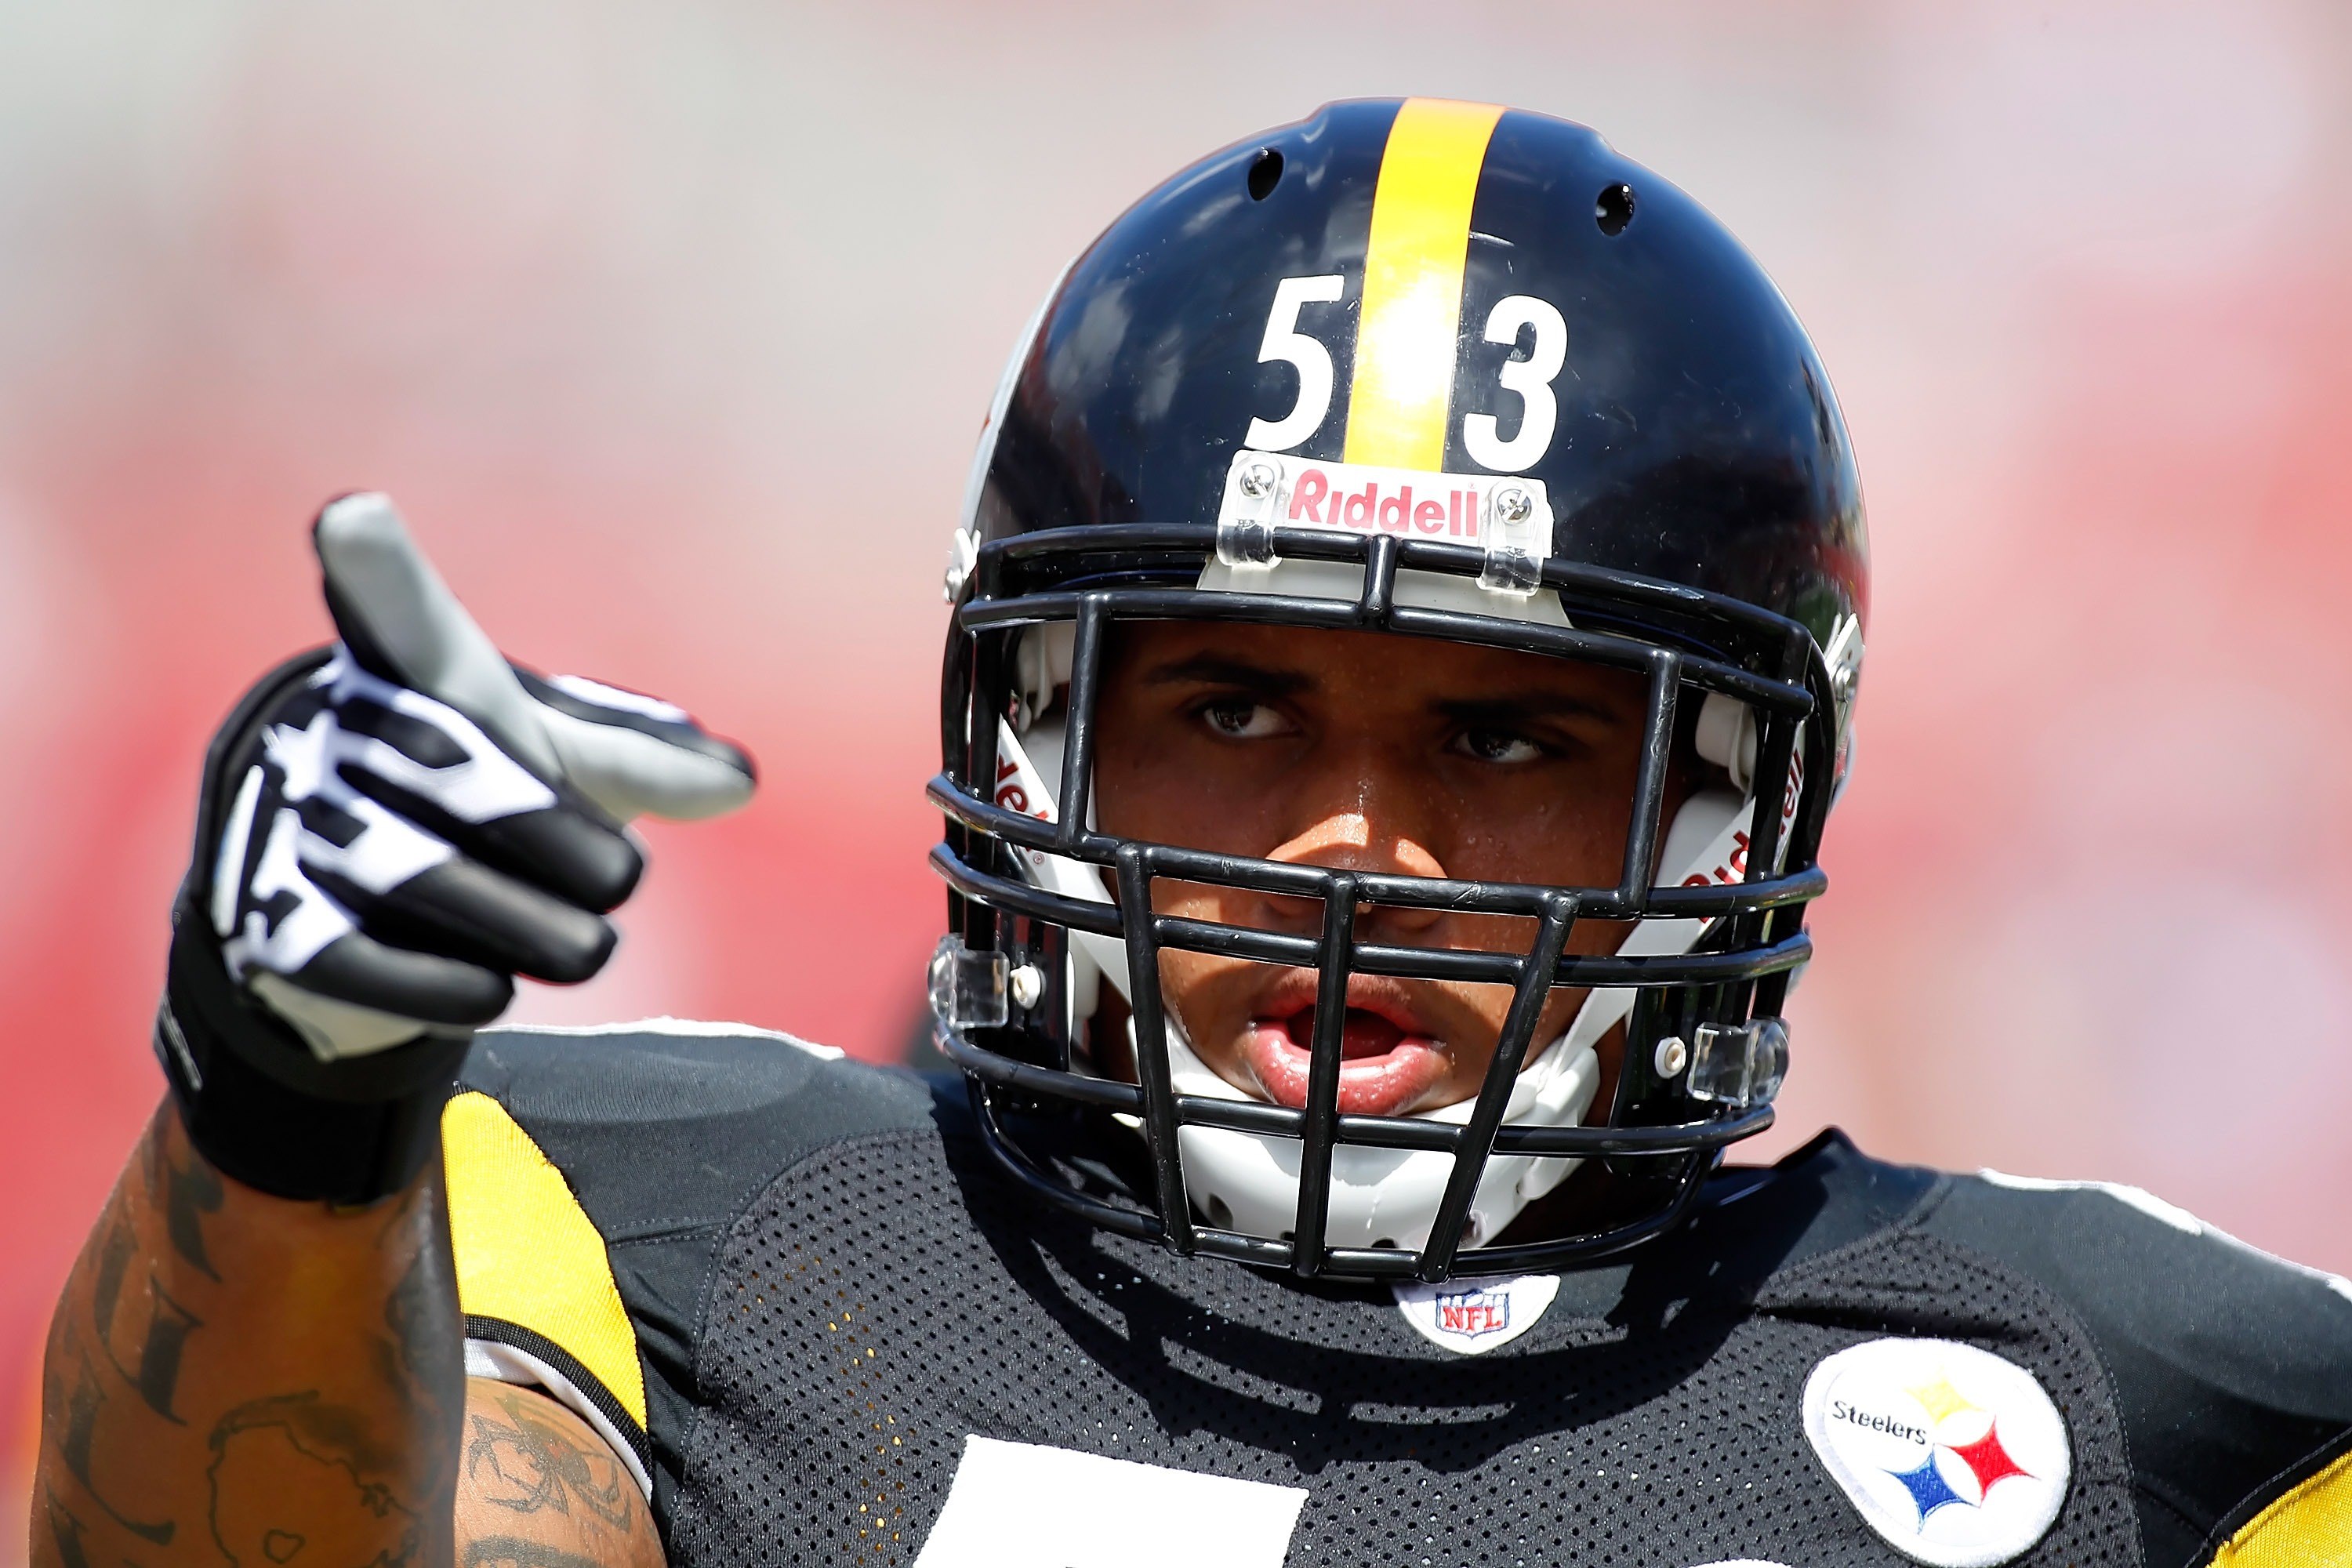 TAMPA, FL - SEPTEMBER 26:  Rookie center Maurkice Pouncey #53 of the Pittsburgh Steelers points during the game against the Tampa Bay Buccaneers at Raymond James Stadium on September 26, 2010 in Tampa, Florida.  (Photo by J. Meric/Getty Images)